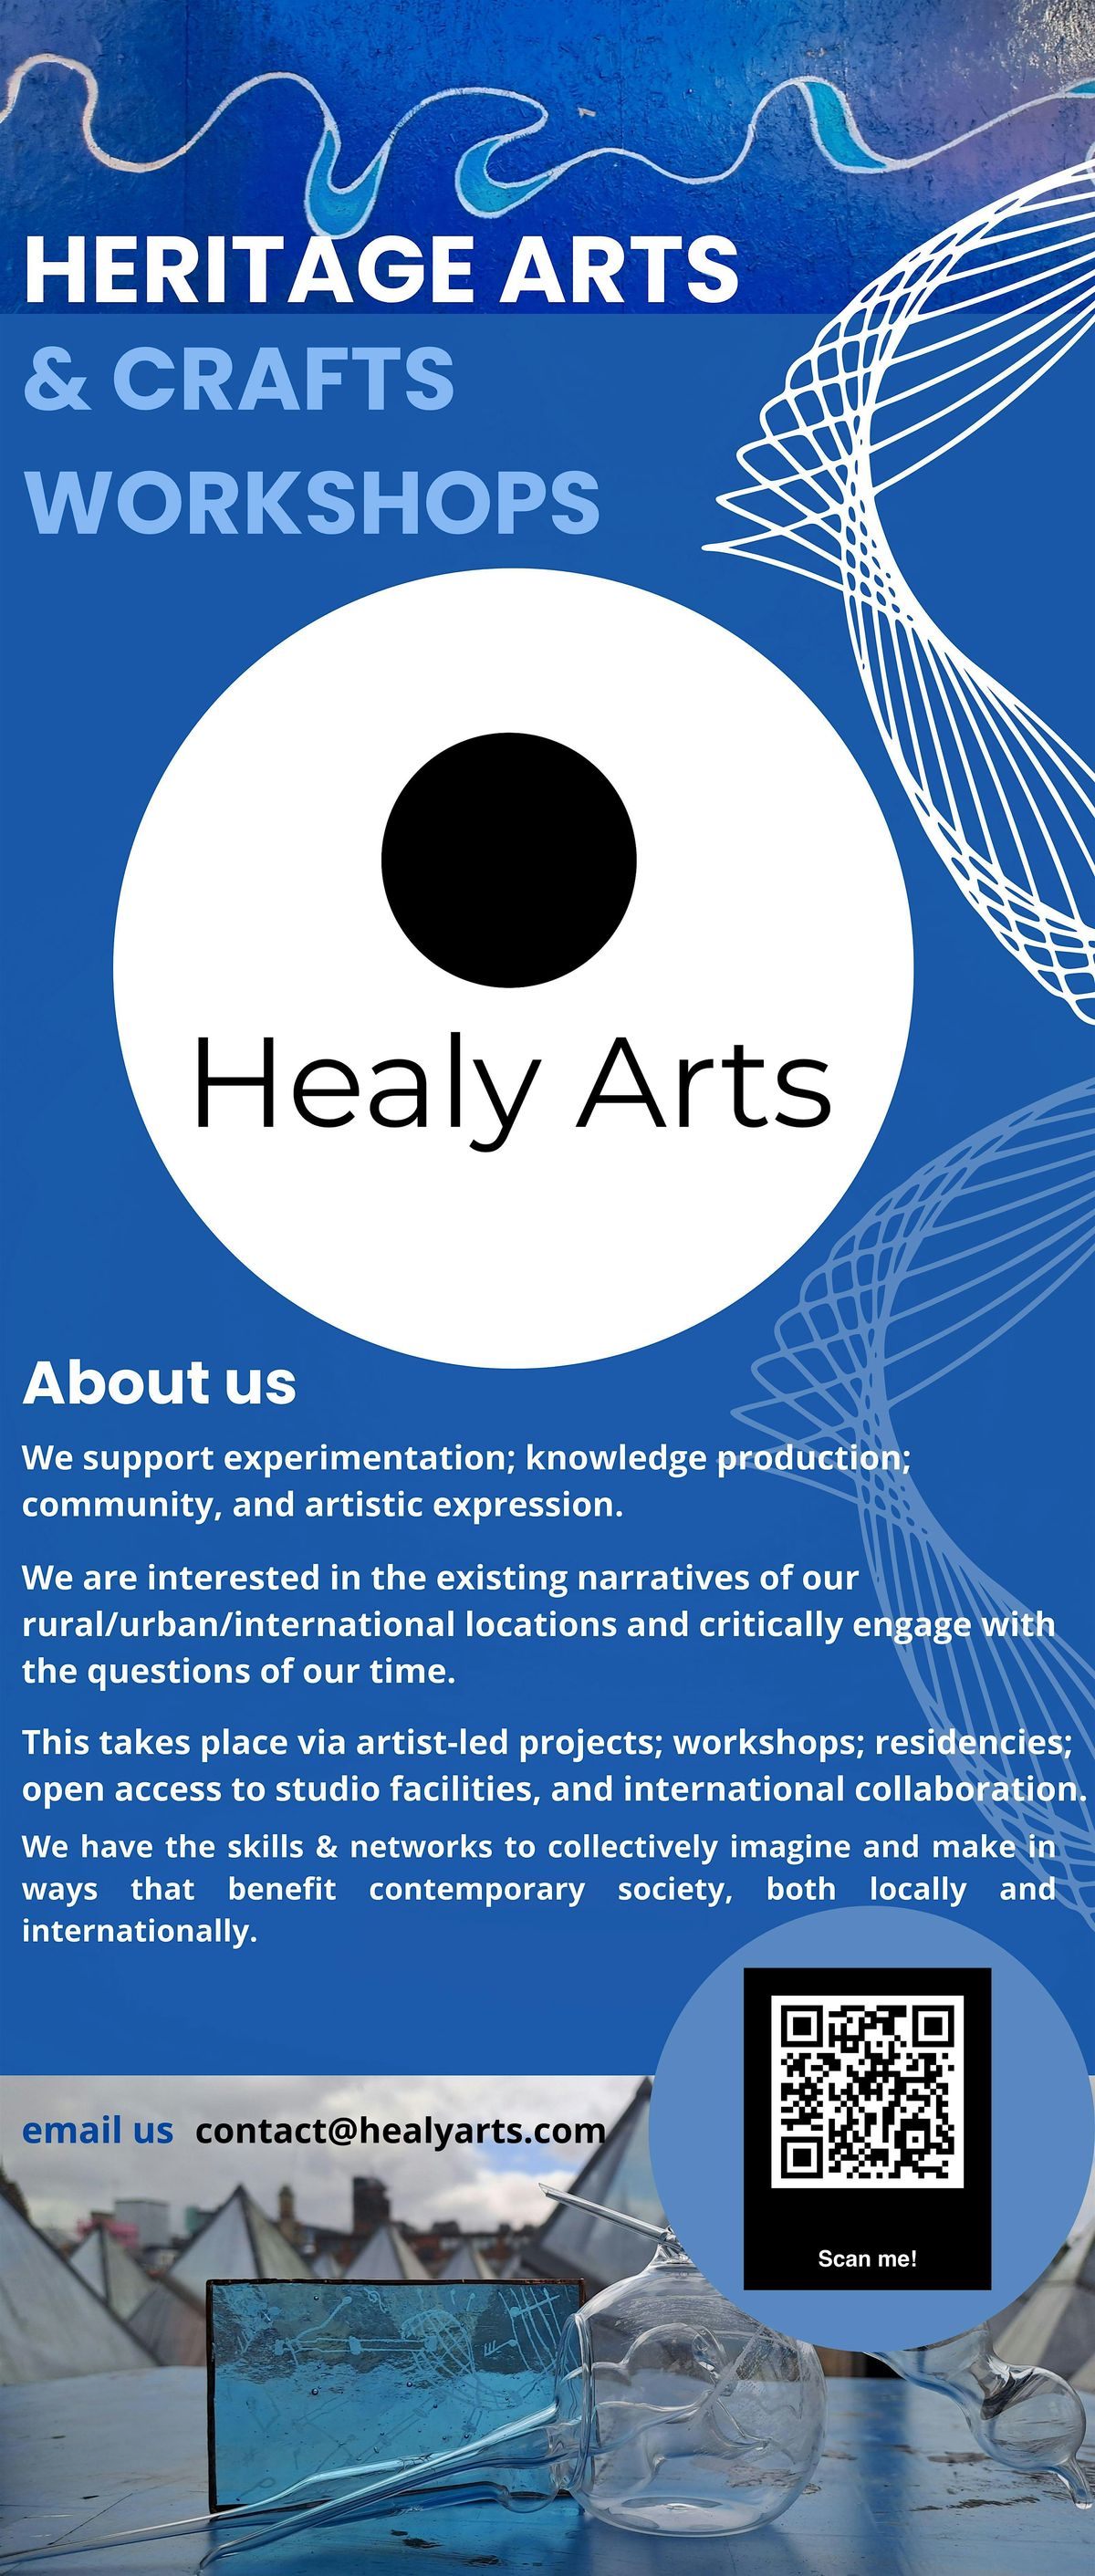 Healy Arts in Whiteinch; haiku poetry; meditative drawing & more